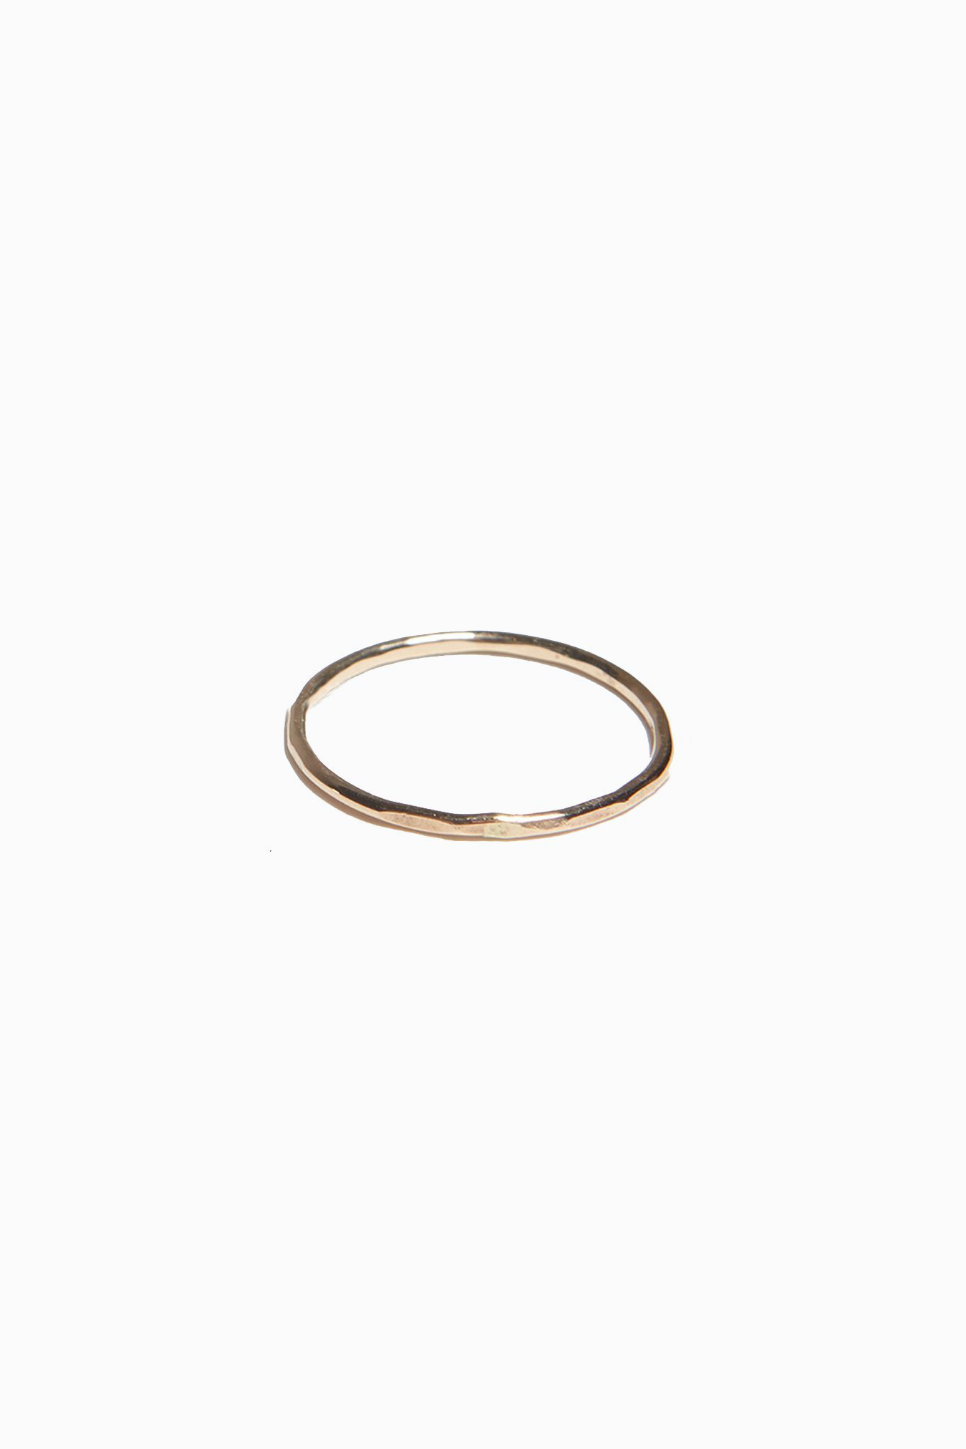 Able - Hammered Stacking Thin Ring - Gold